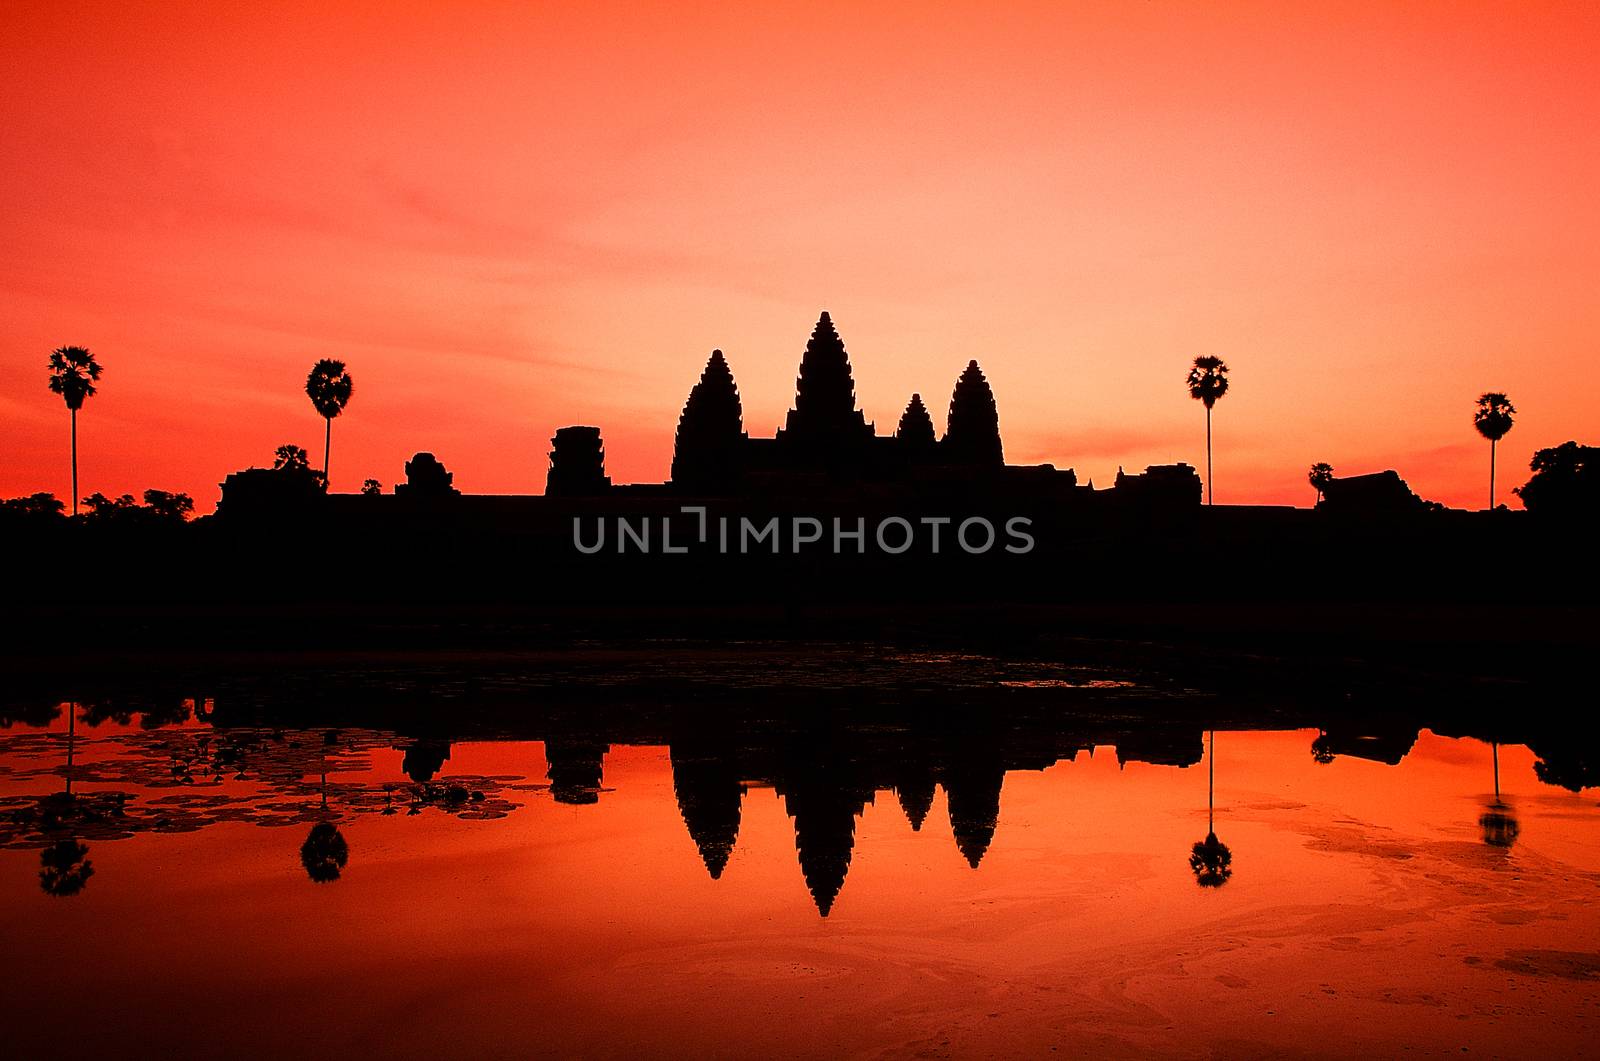 Angkor Wat temple in Cambodia. by jee1999